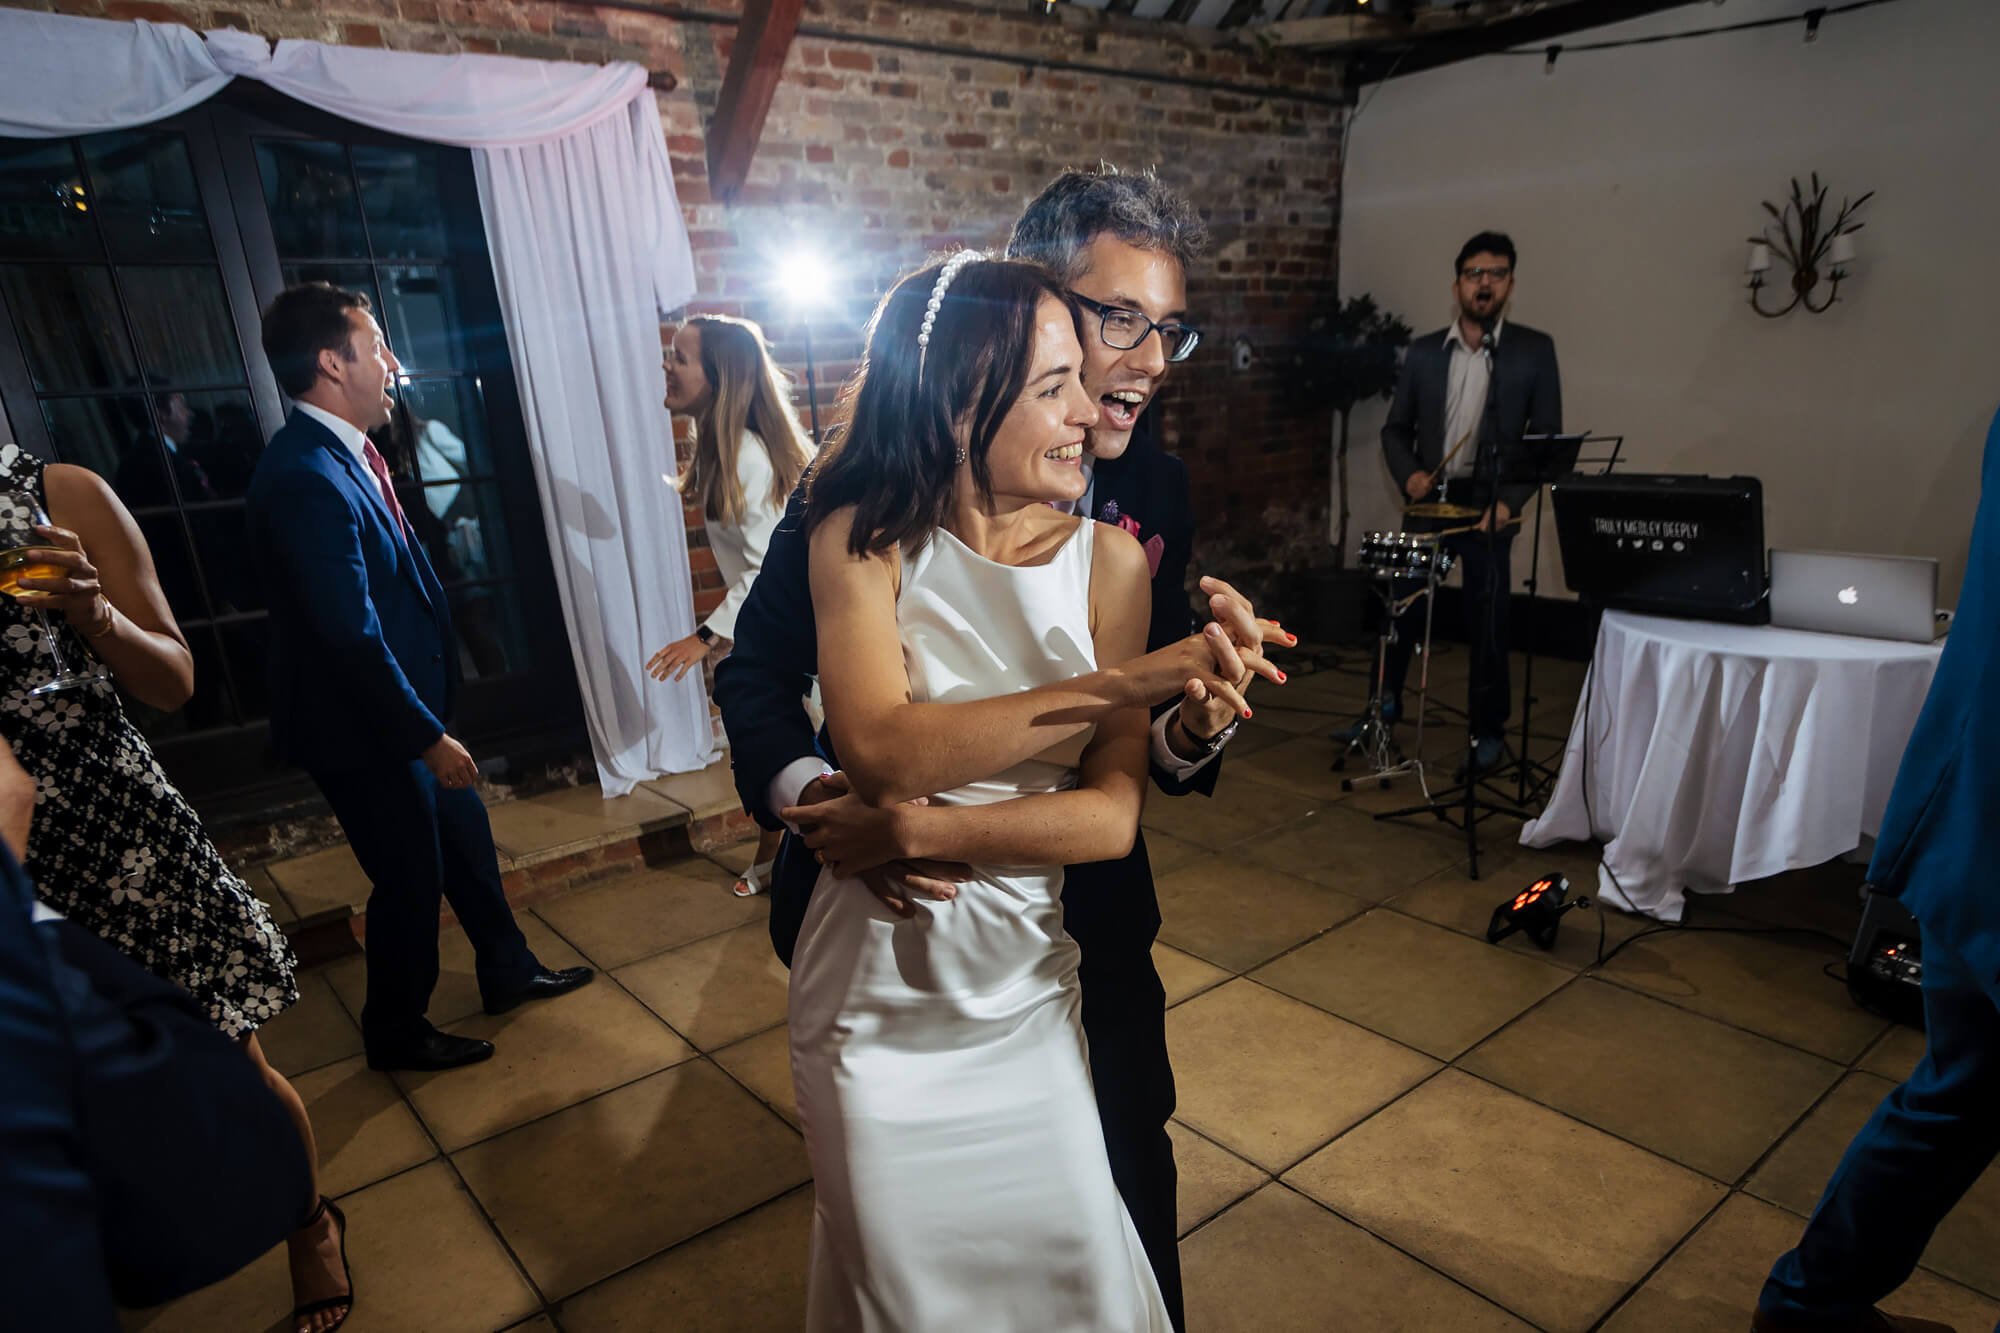 Bride and groom on the dance floor at their wedding